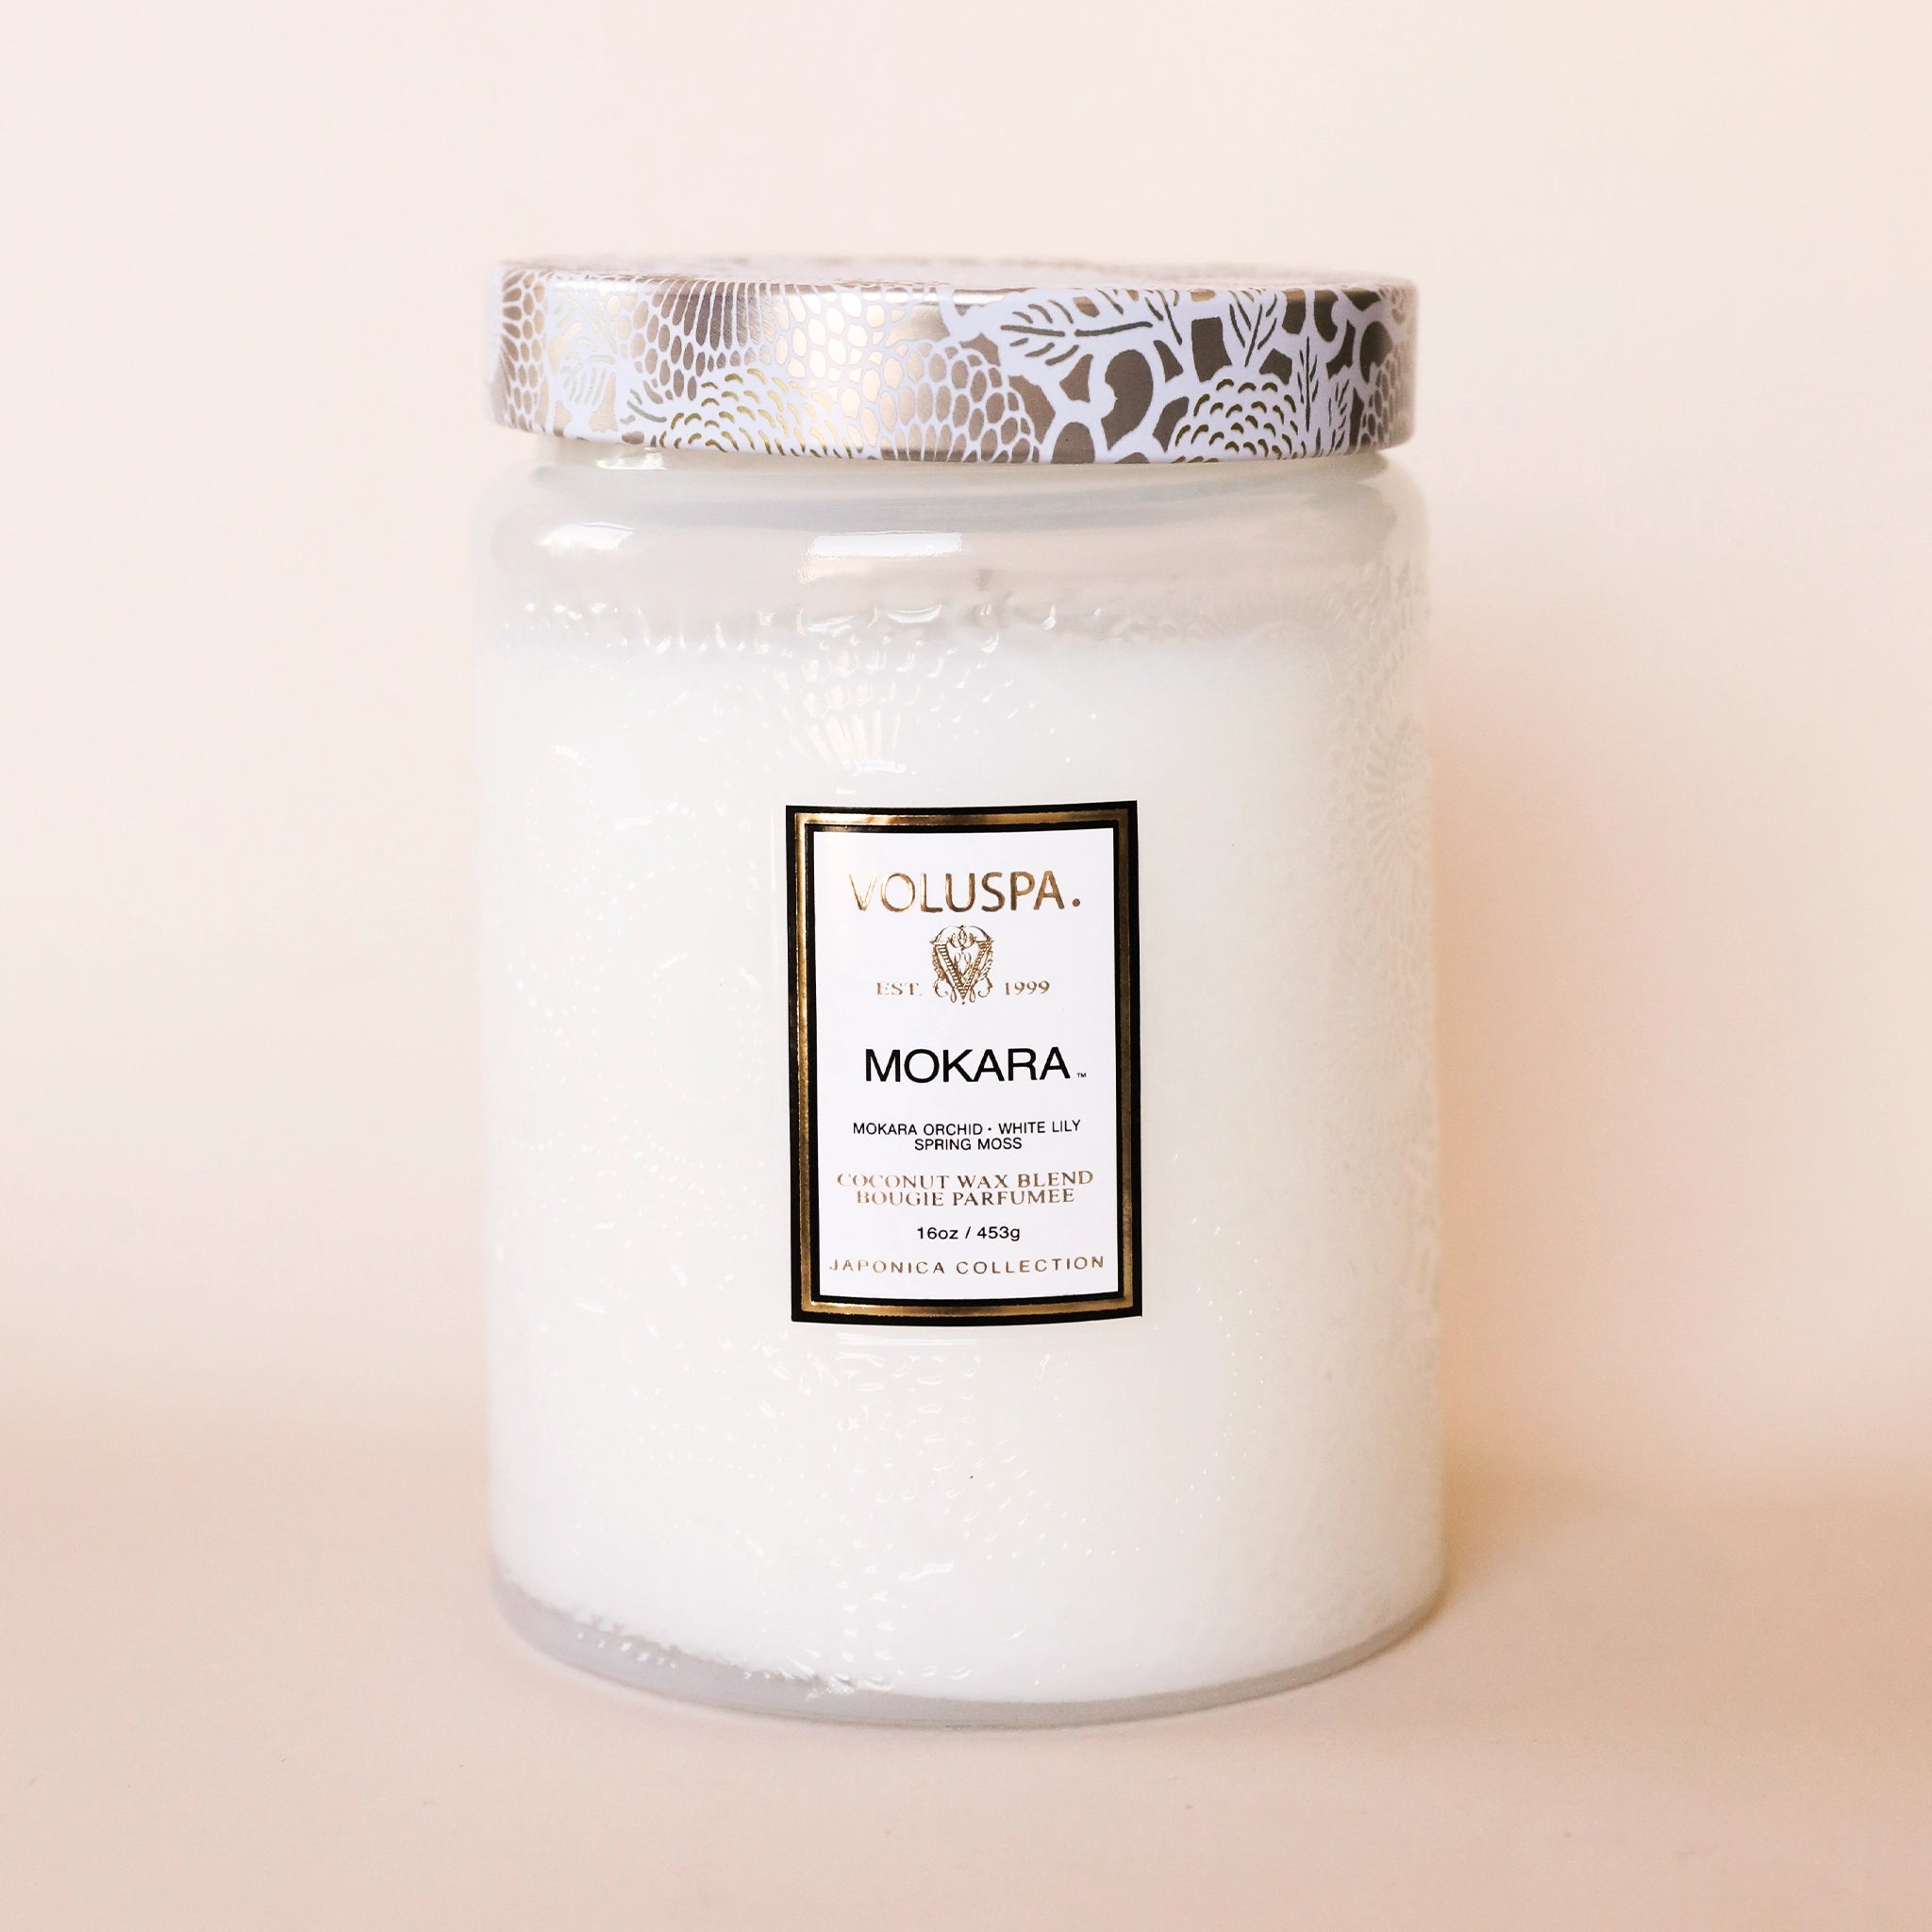 On a white background is a white decorative glass jar with a coordinating lid and a label on the front that reads, "Voluspa Mokara"